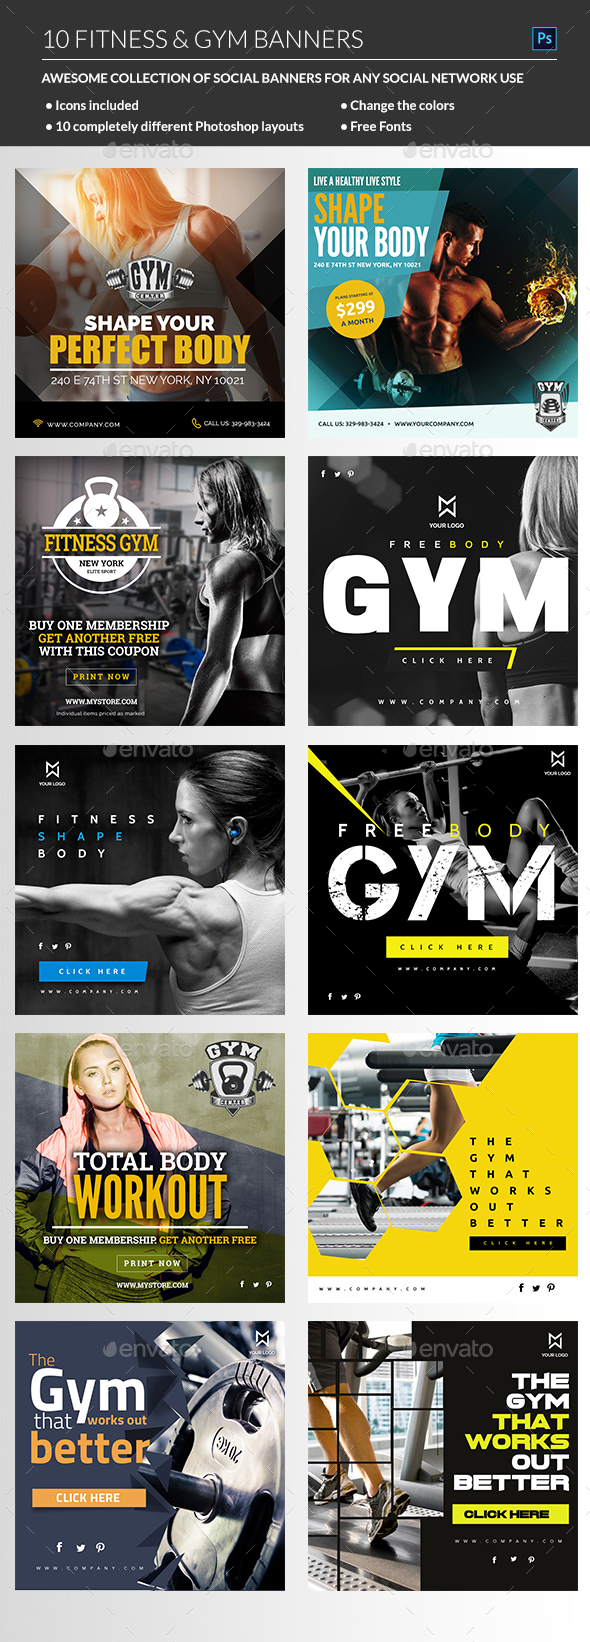 Fitness Banner Graphics Designs Templates From Graphicriver